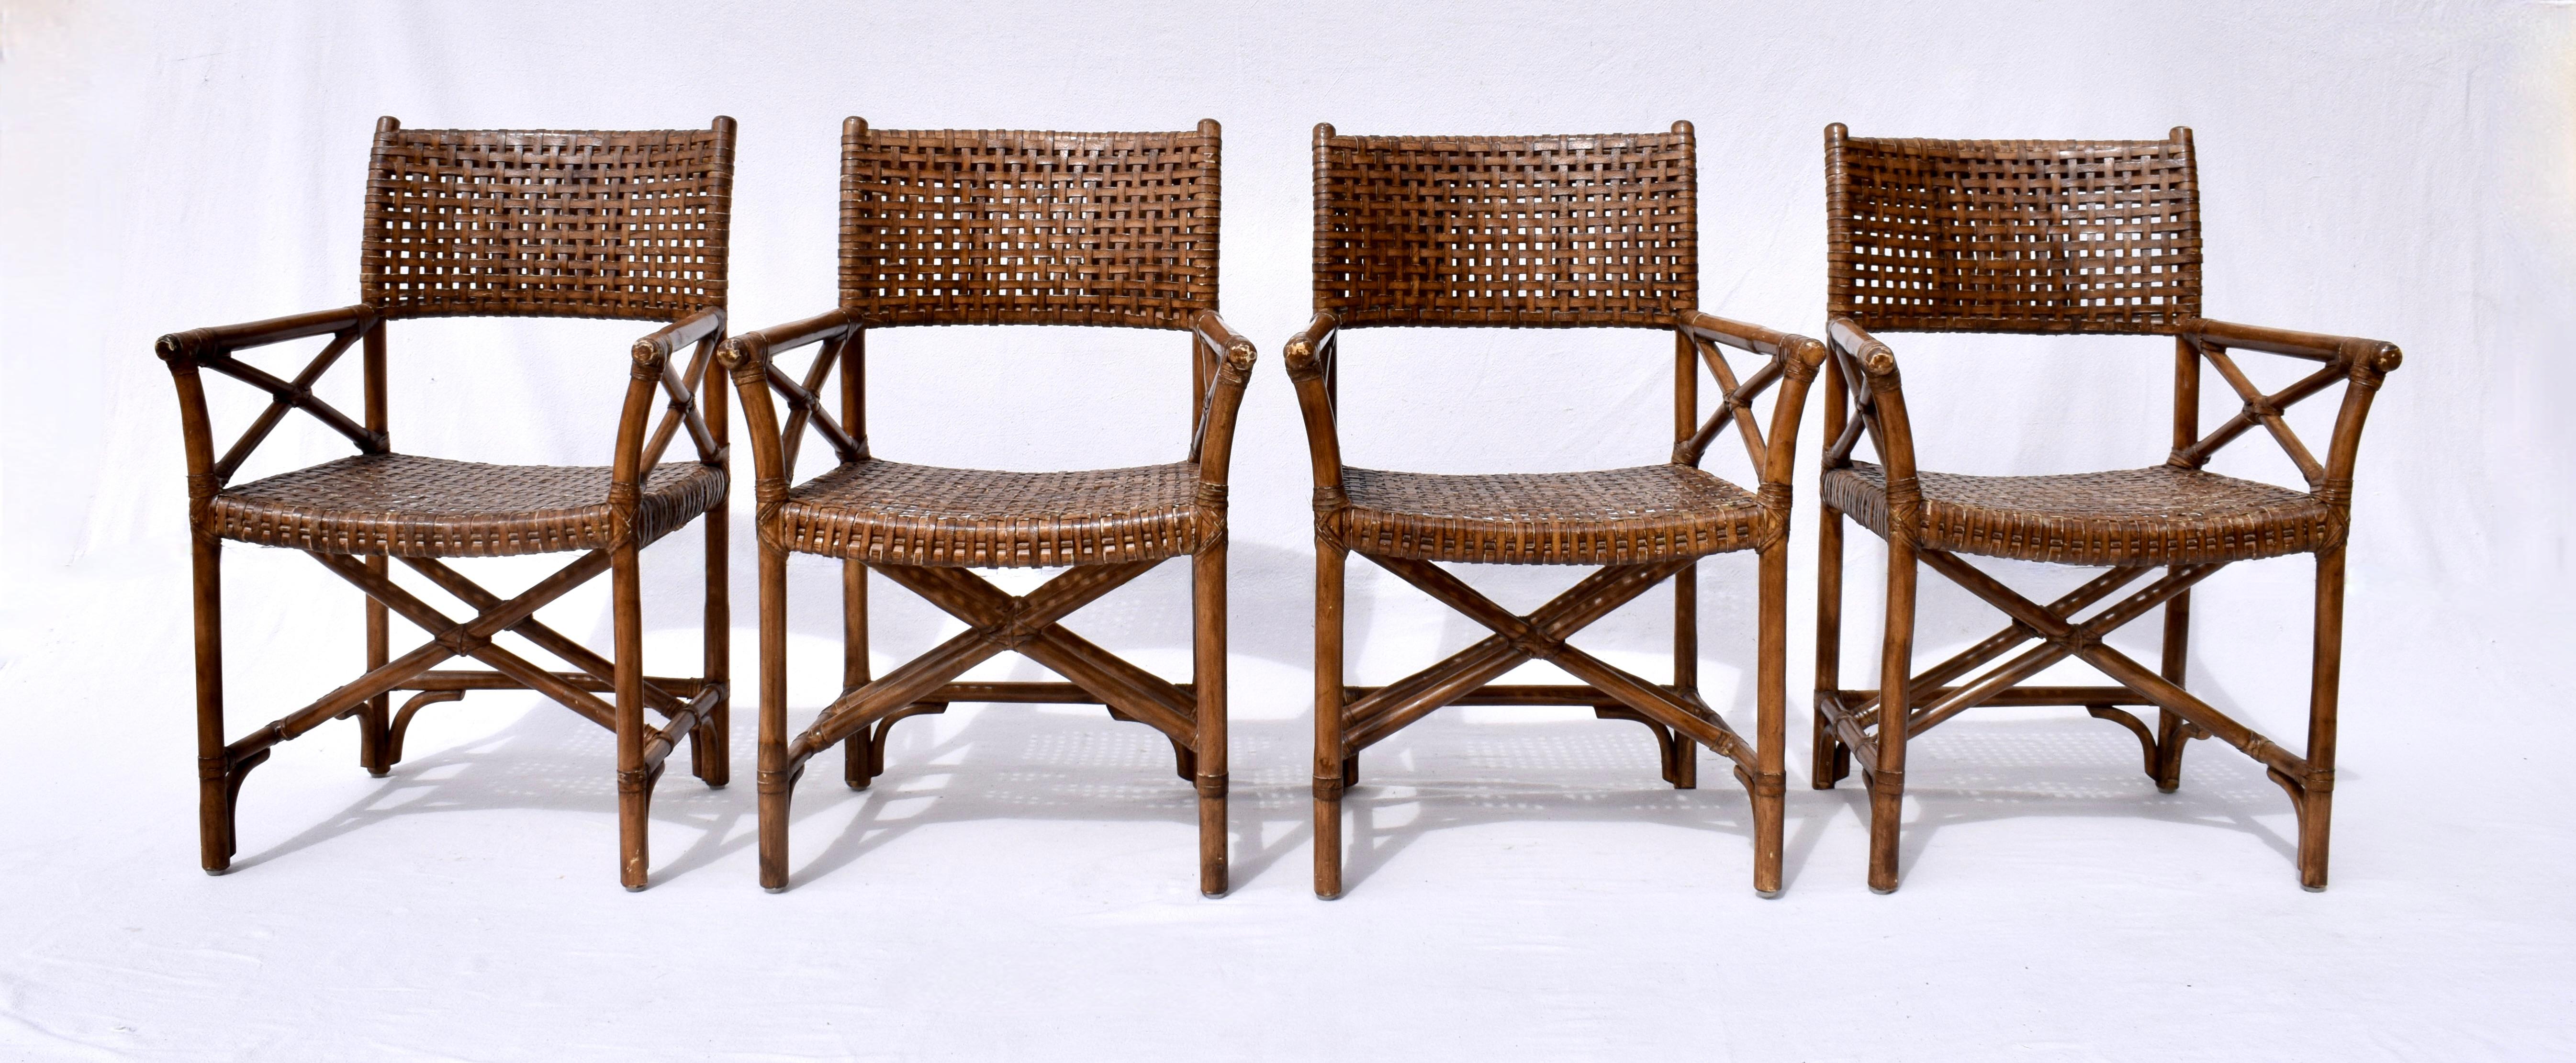 British Colonial McGuire Style Laced Leather Rawhide Rattan Dining Chairs For Sale